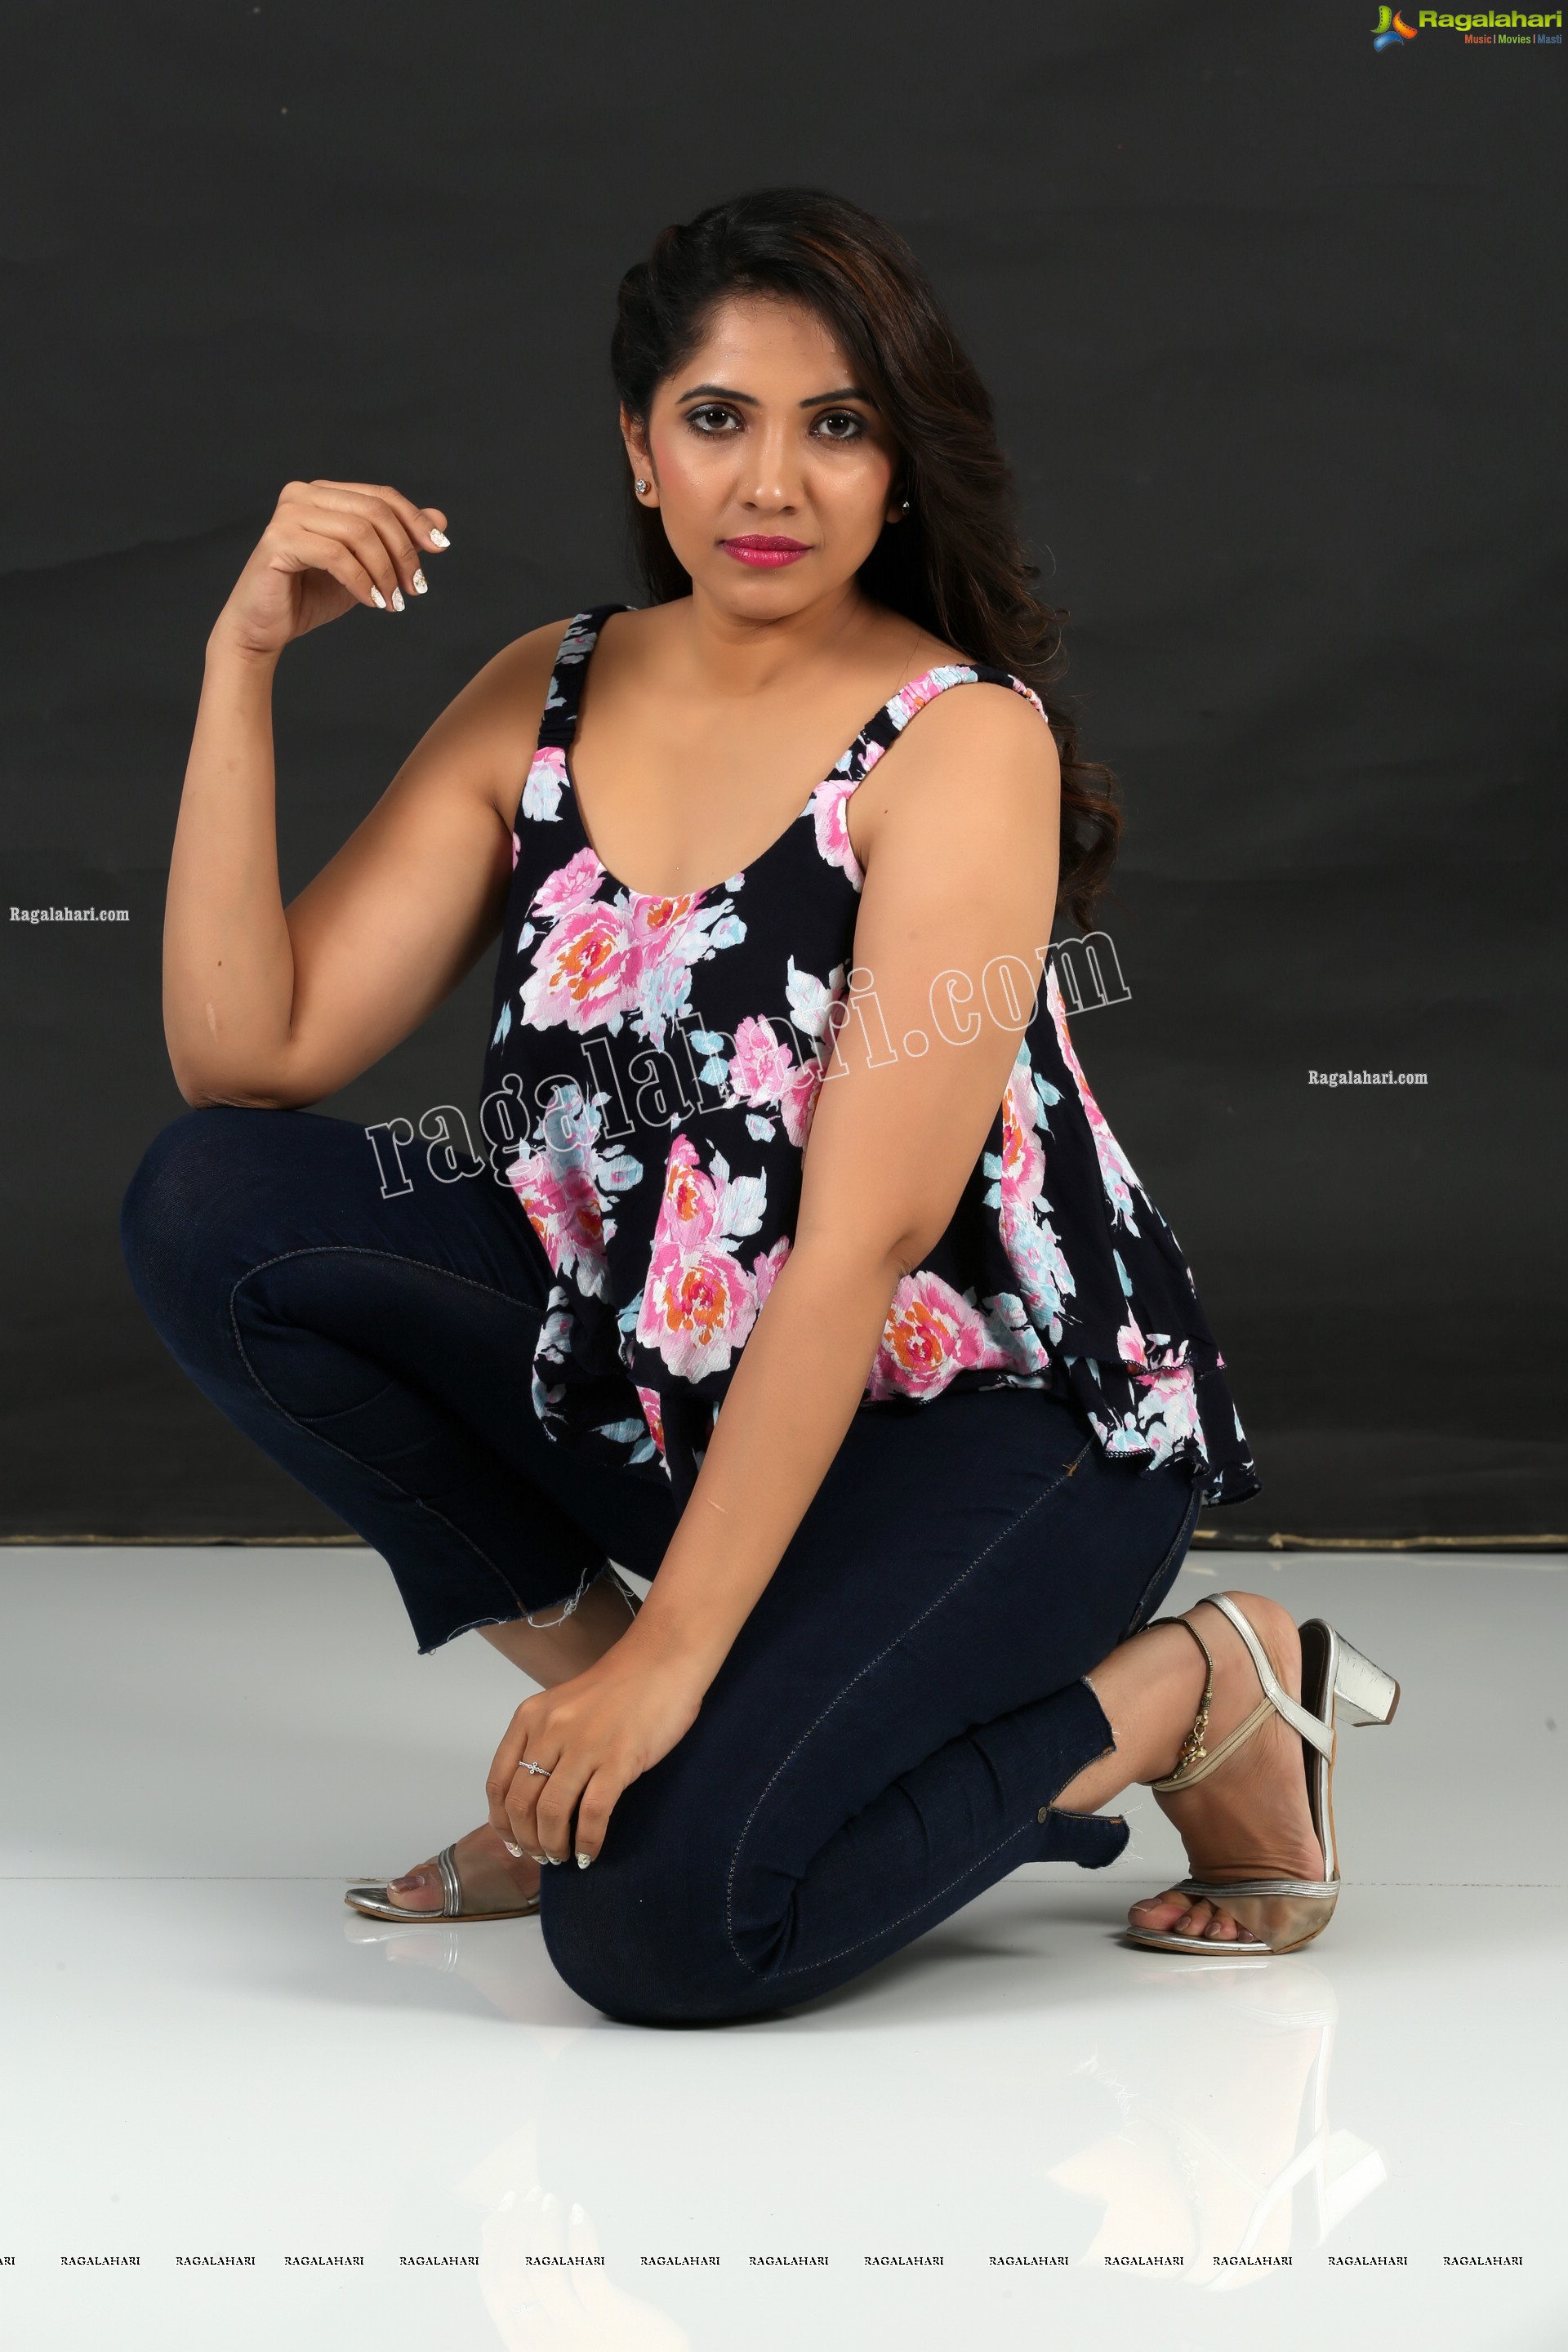 Anchor Indu Holding Basketball, Exclusive Photo Shoot